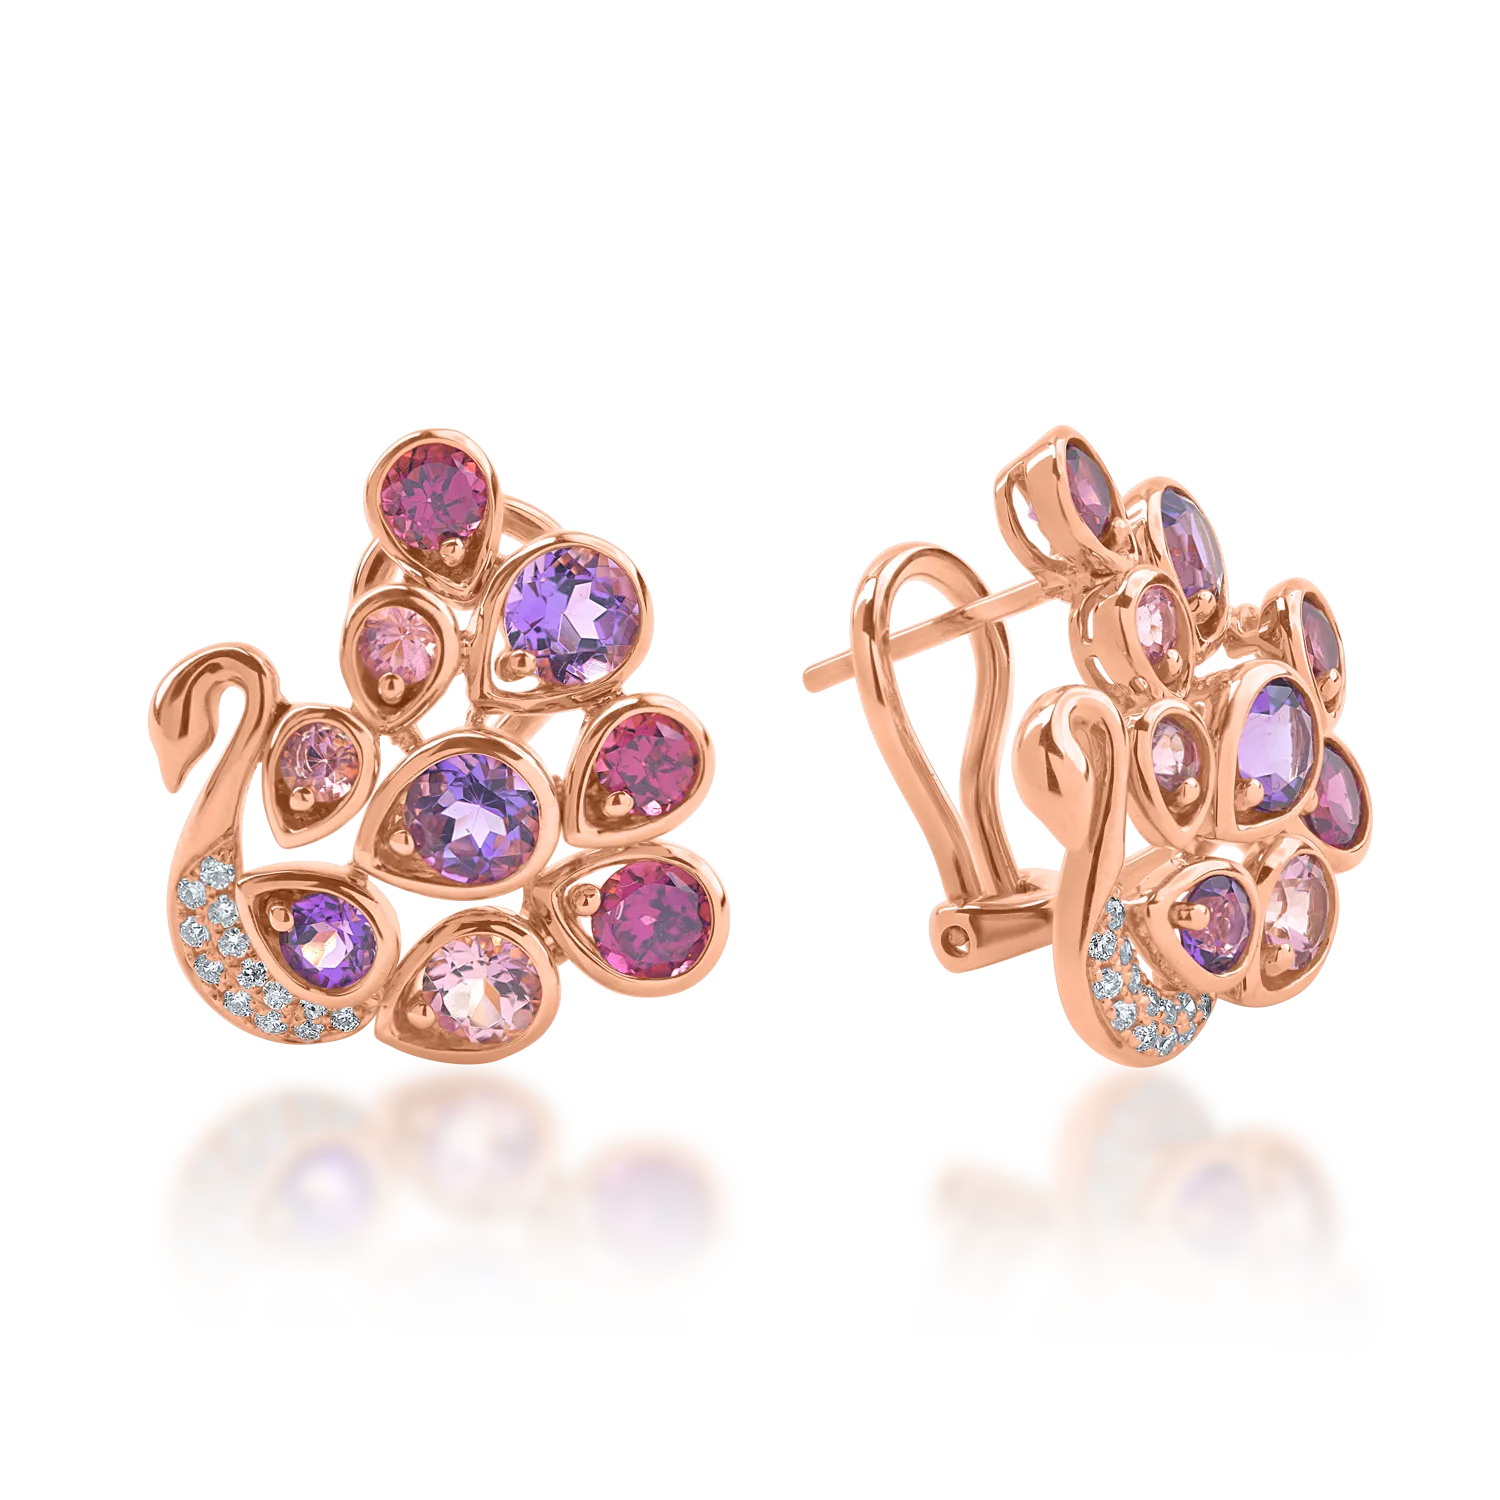 Rose gold peacock earrings with 3.7ct semi-precious stones